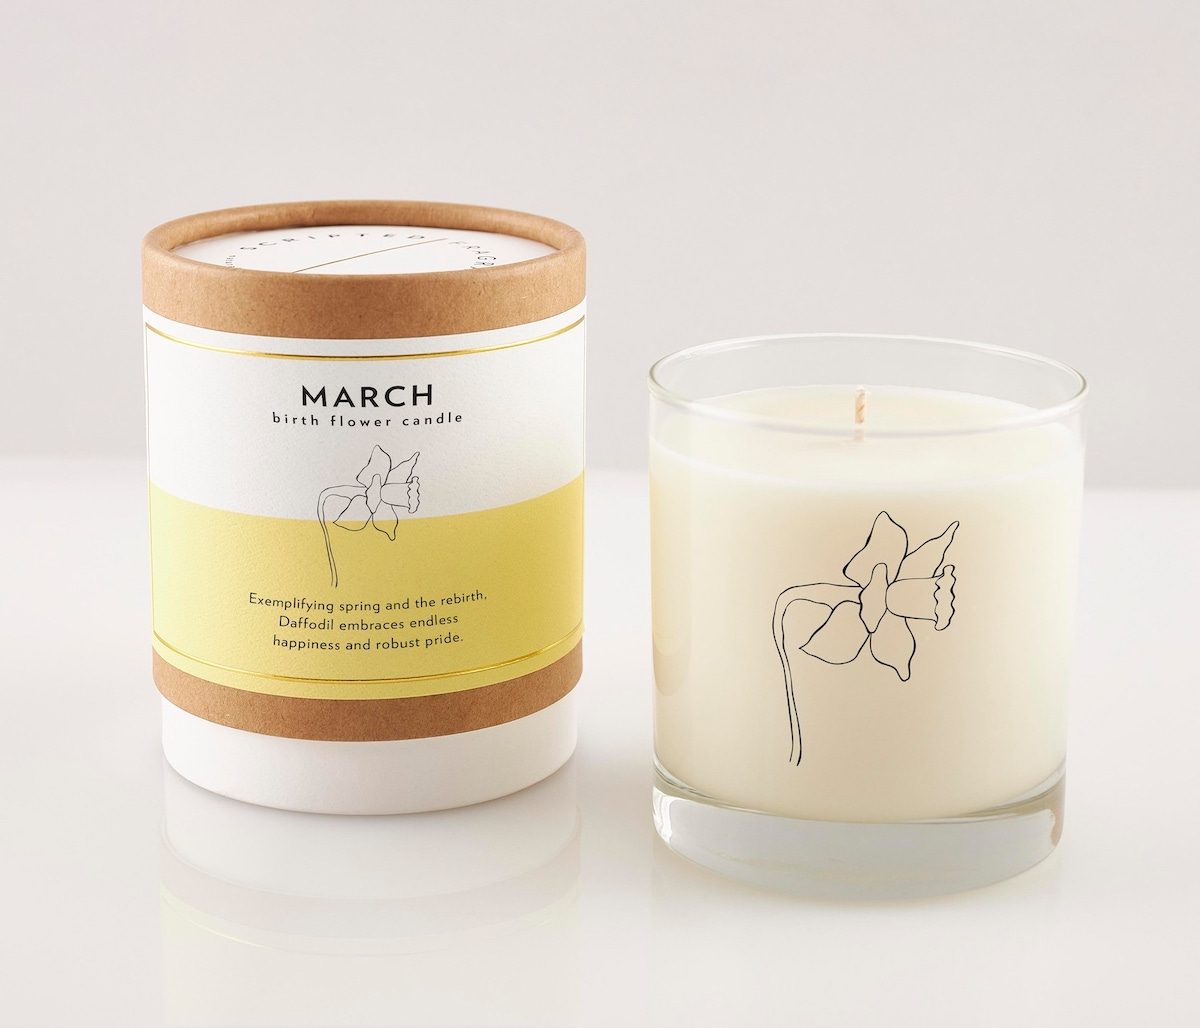  March Birth Flower Gift Guide